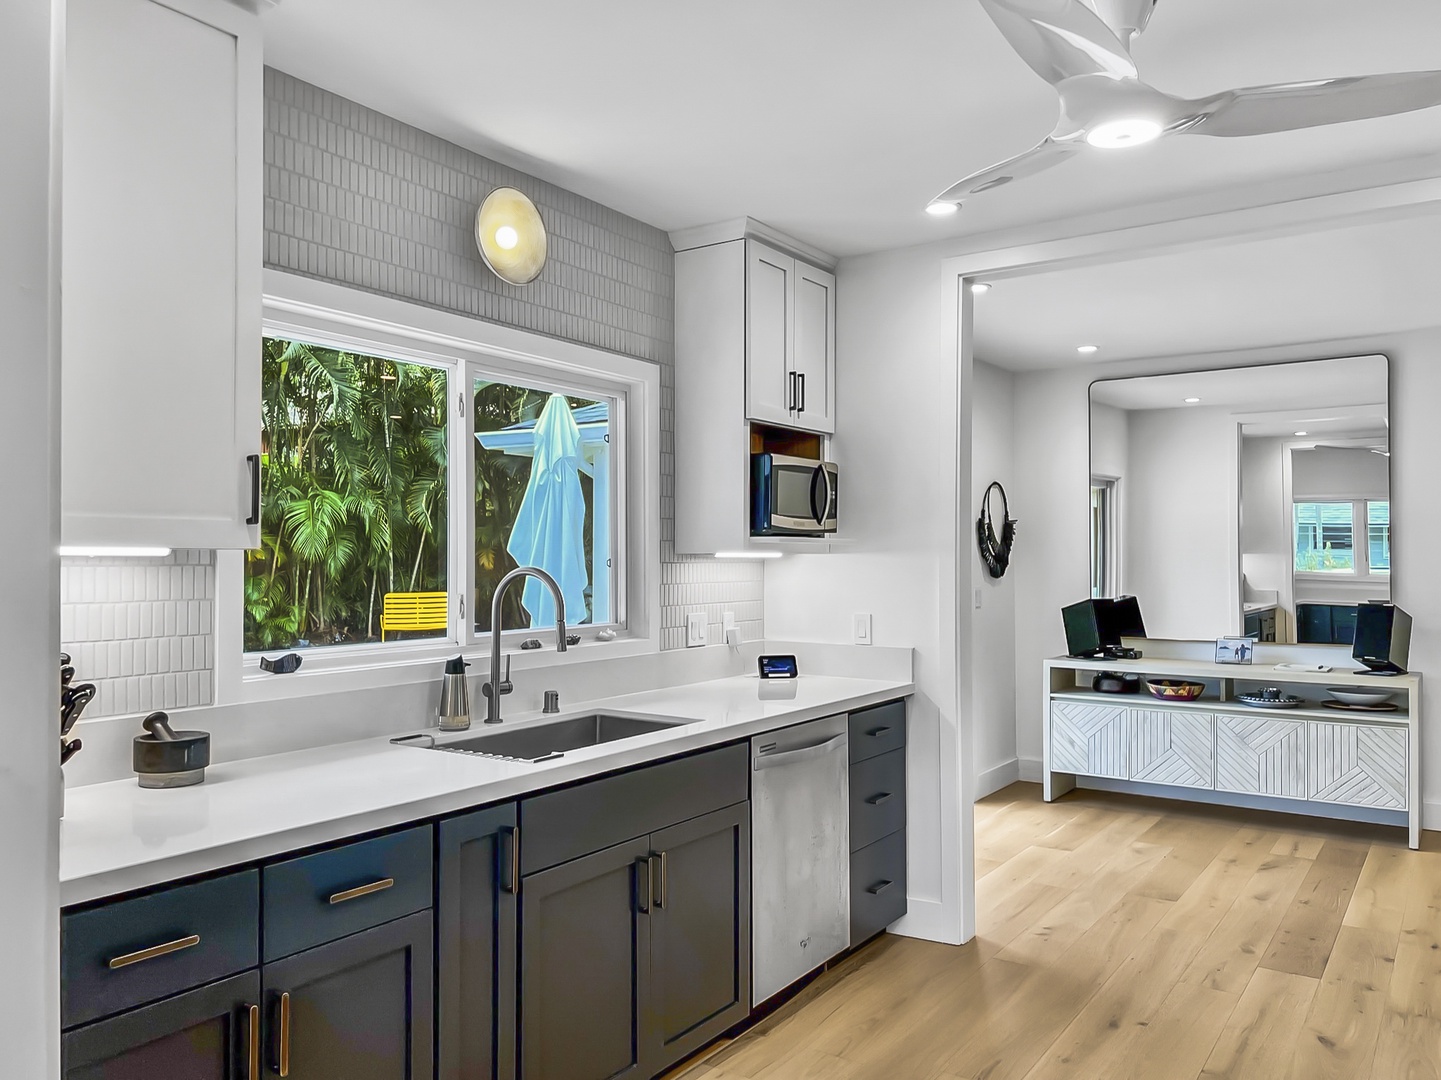 Kailua Vacation Rentals, Lanikai Ola Nani - Wash dishes with a view! Our kitchen sink offers a window to the world, turning chores into moments of serenity.